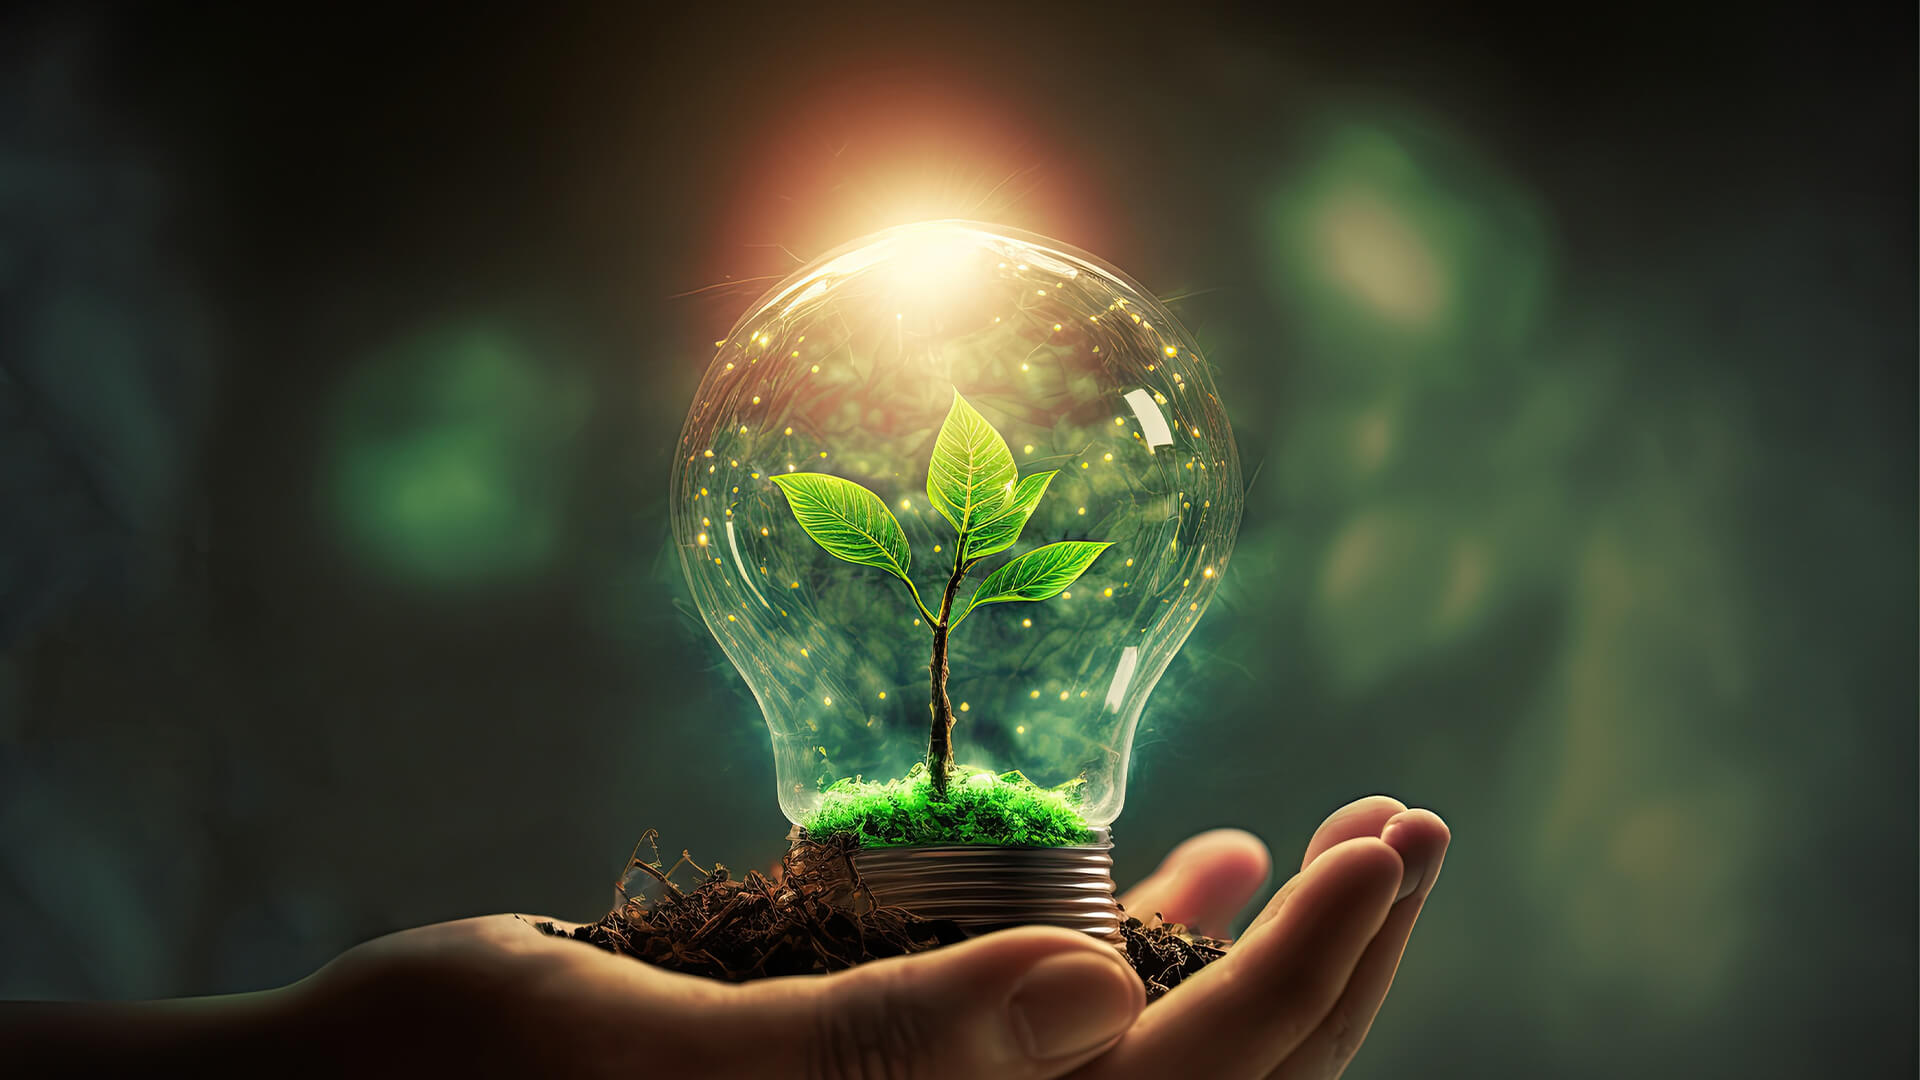 human hand holding a light bulb with a plant sprout inside